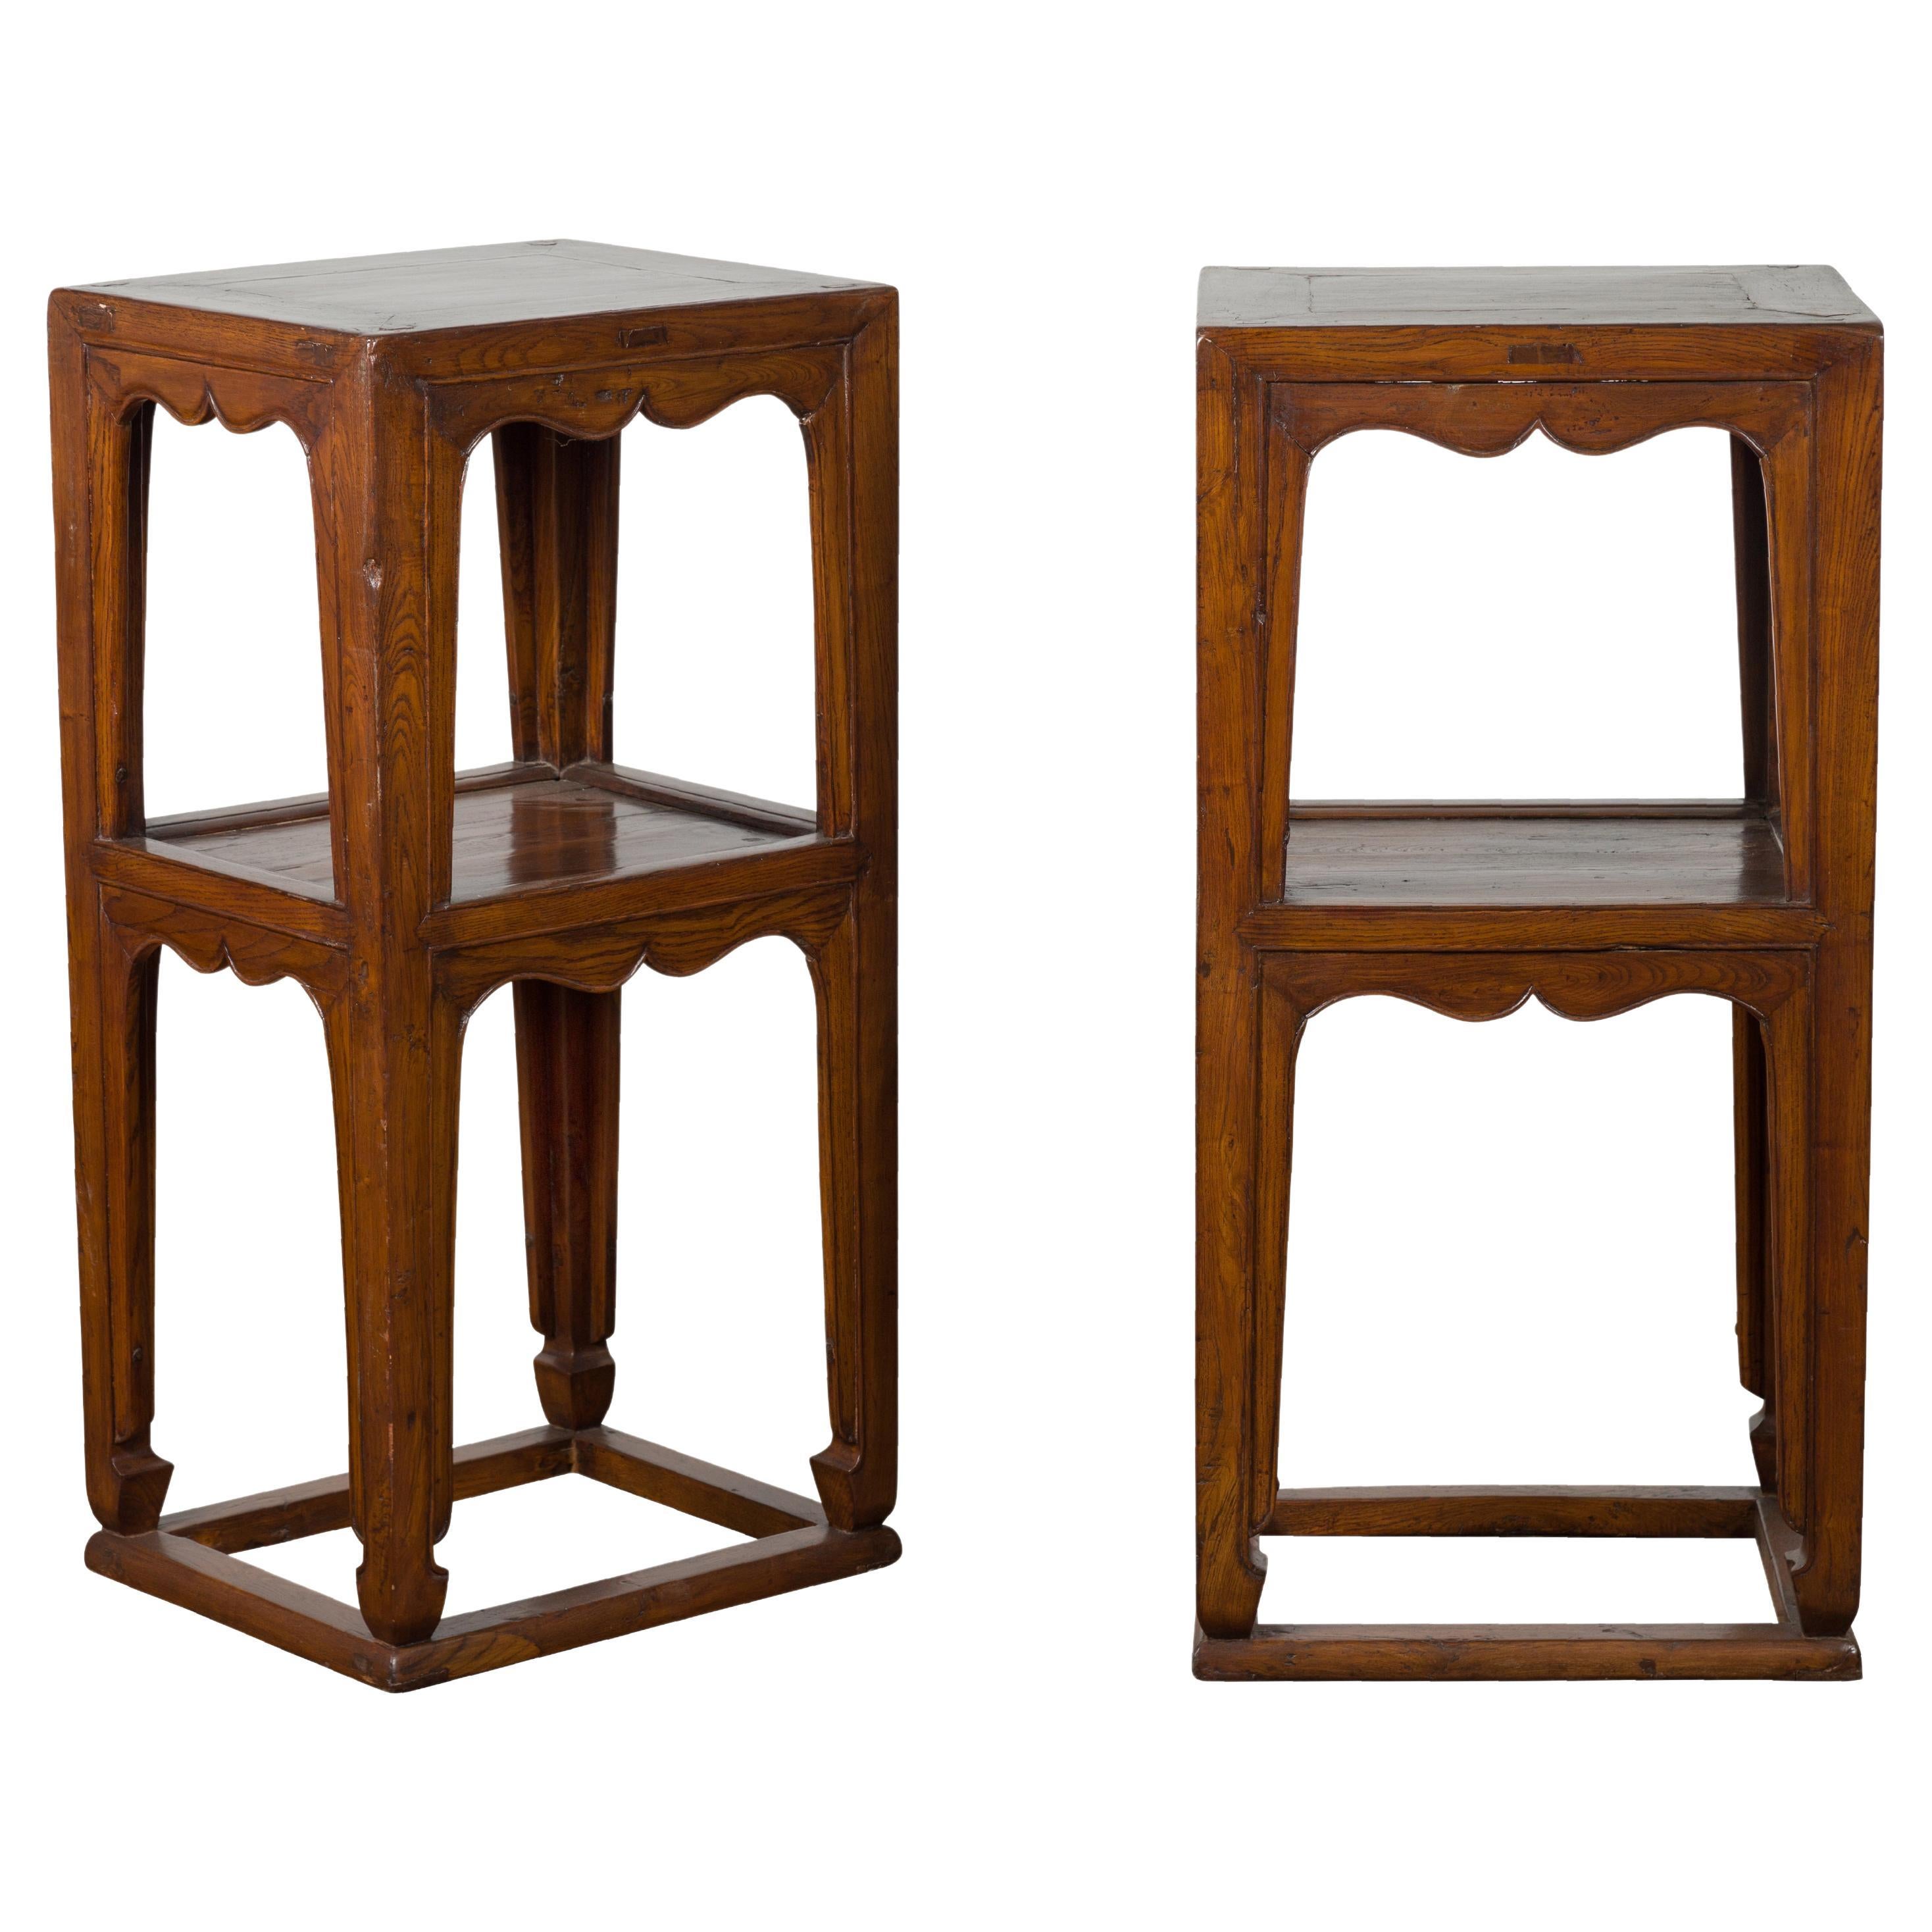 Pair of Chinese Late Qing Dynasty Tiered Lamp Tables with Carved Aprons For Sale